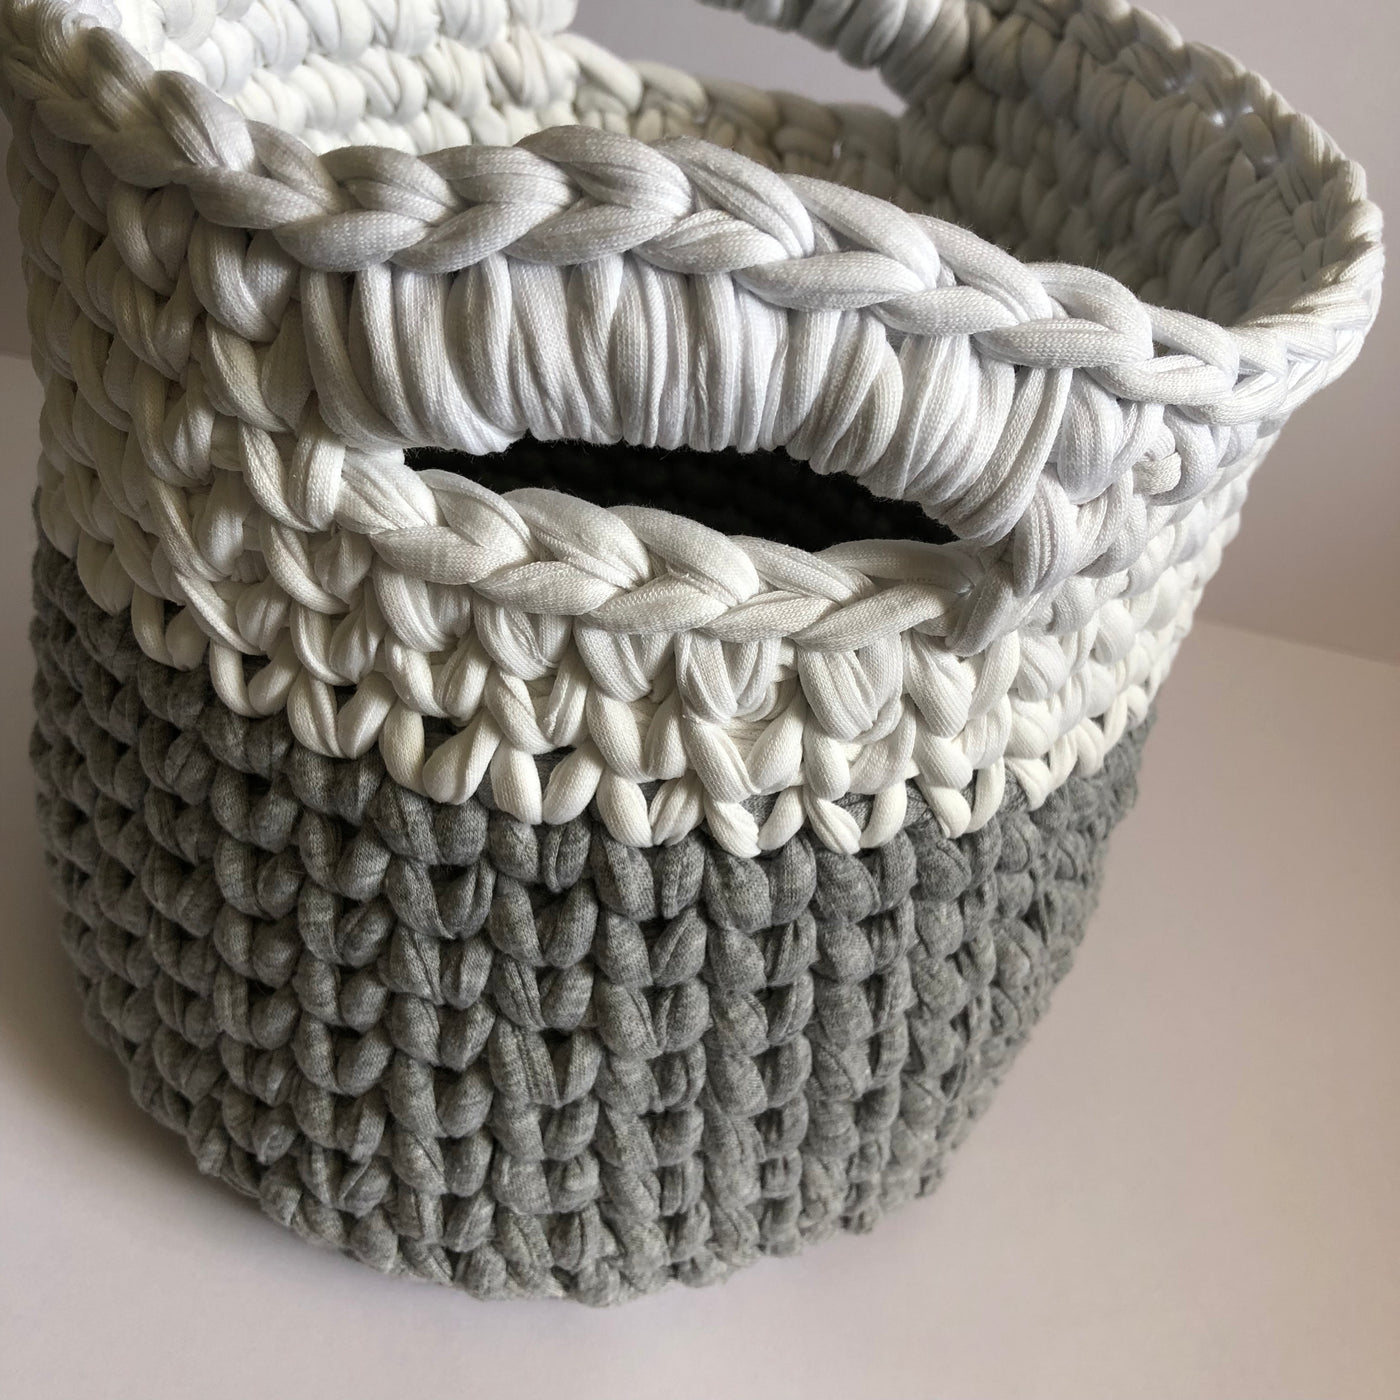 Where can I find Patterns Crochet Basket with Handles Pattern PDF? This pattern is designed using our T-shirt Yarn and recommended for advanced beginners. You will need a 12mm (US O) or similar hook. It is written in US terminology and uses crochet abbreviations. 9 pages in length, including step-by-step photographs, you will receive a PDF copy via email within 24 hours after your order is complete.